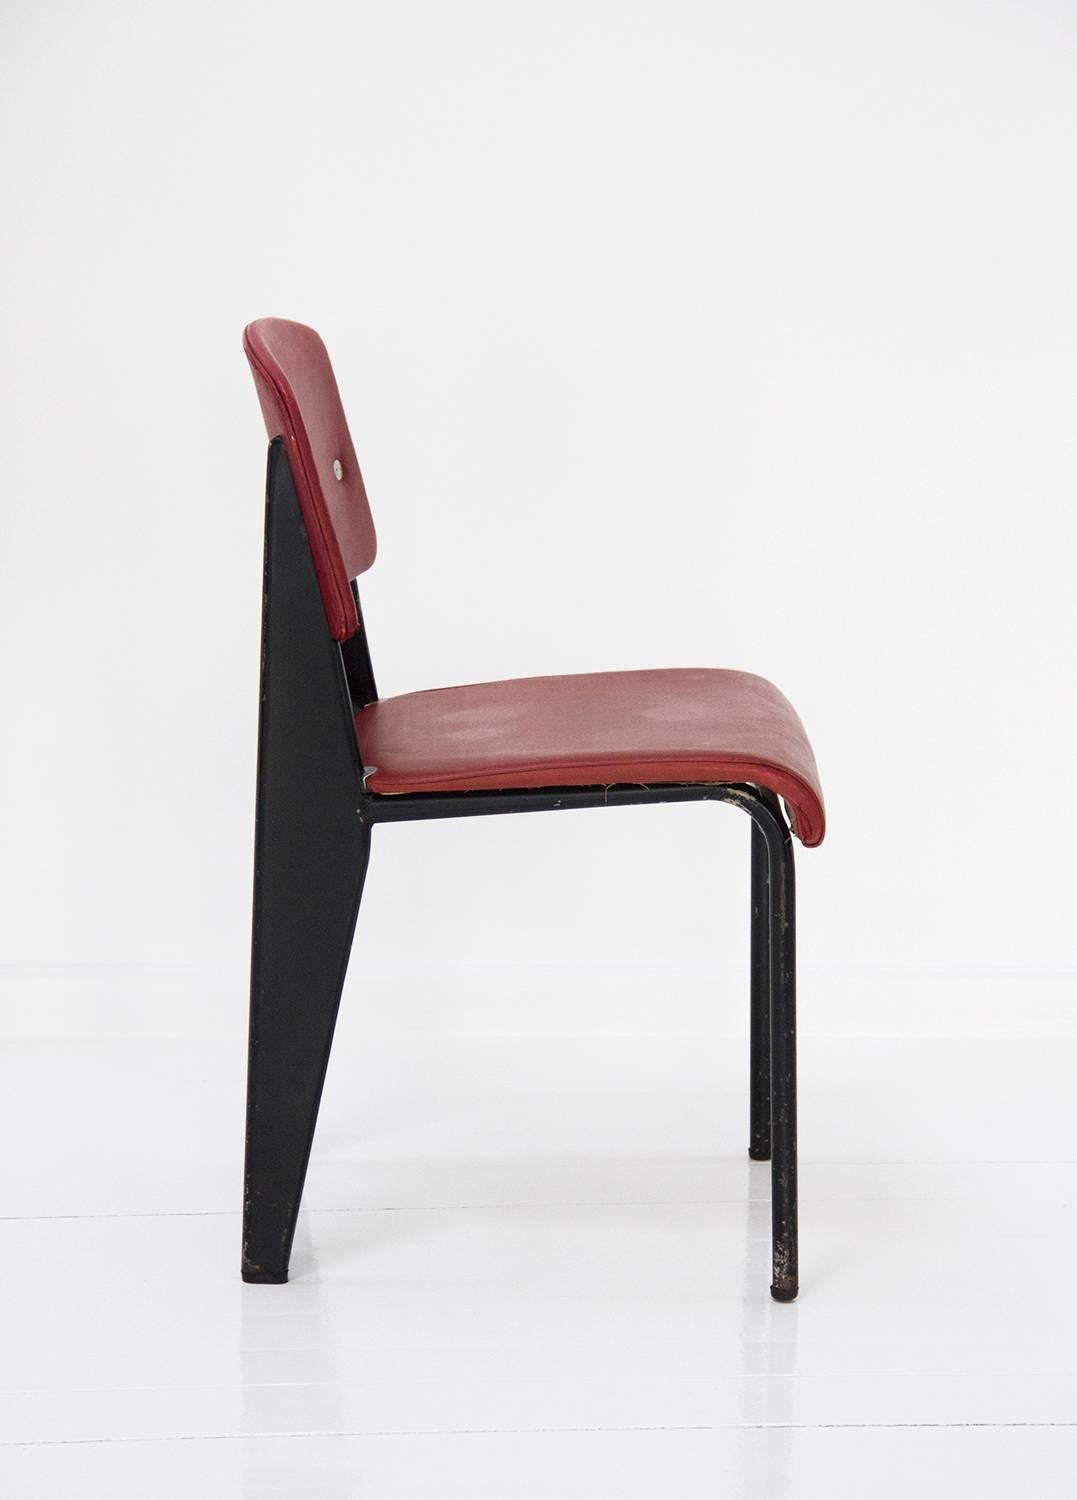 Steel Standard Chair Designed by Jean Prouve, circa 1950, France